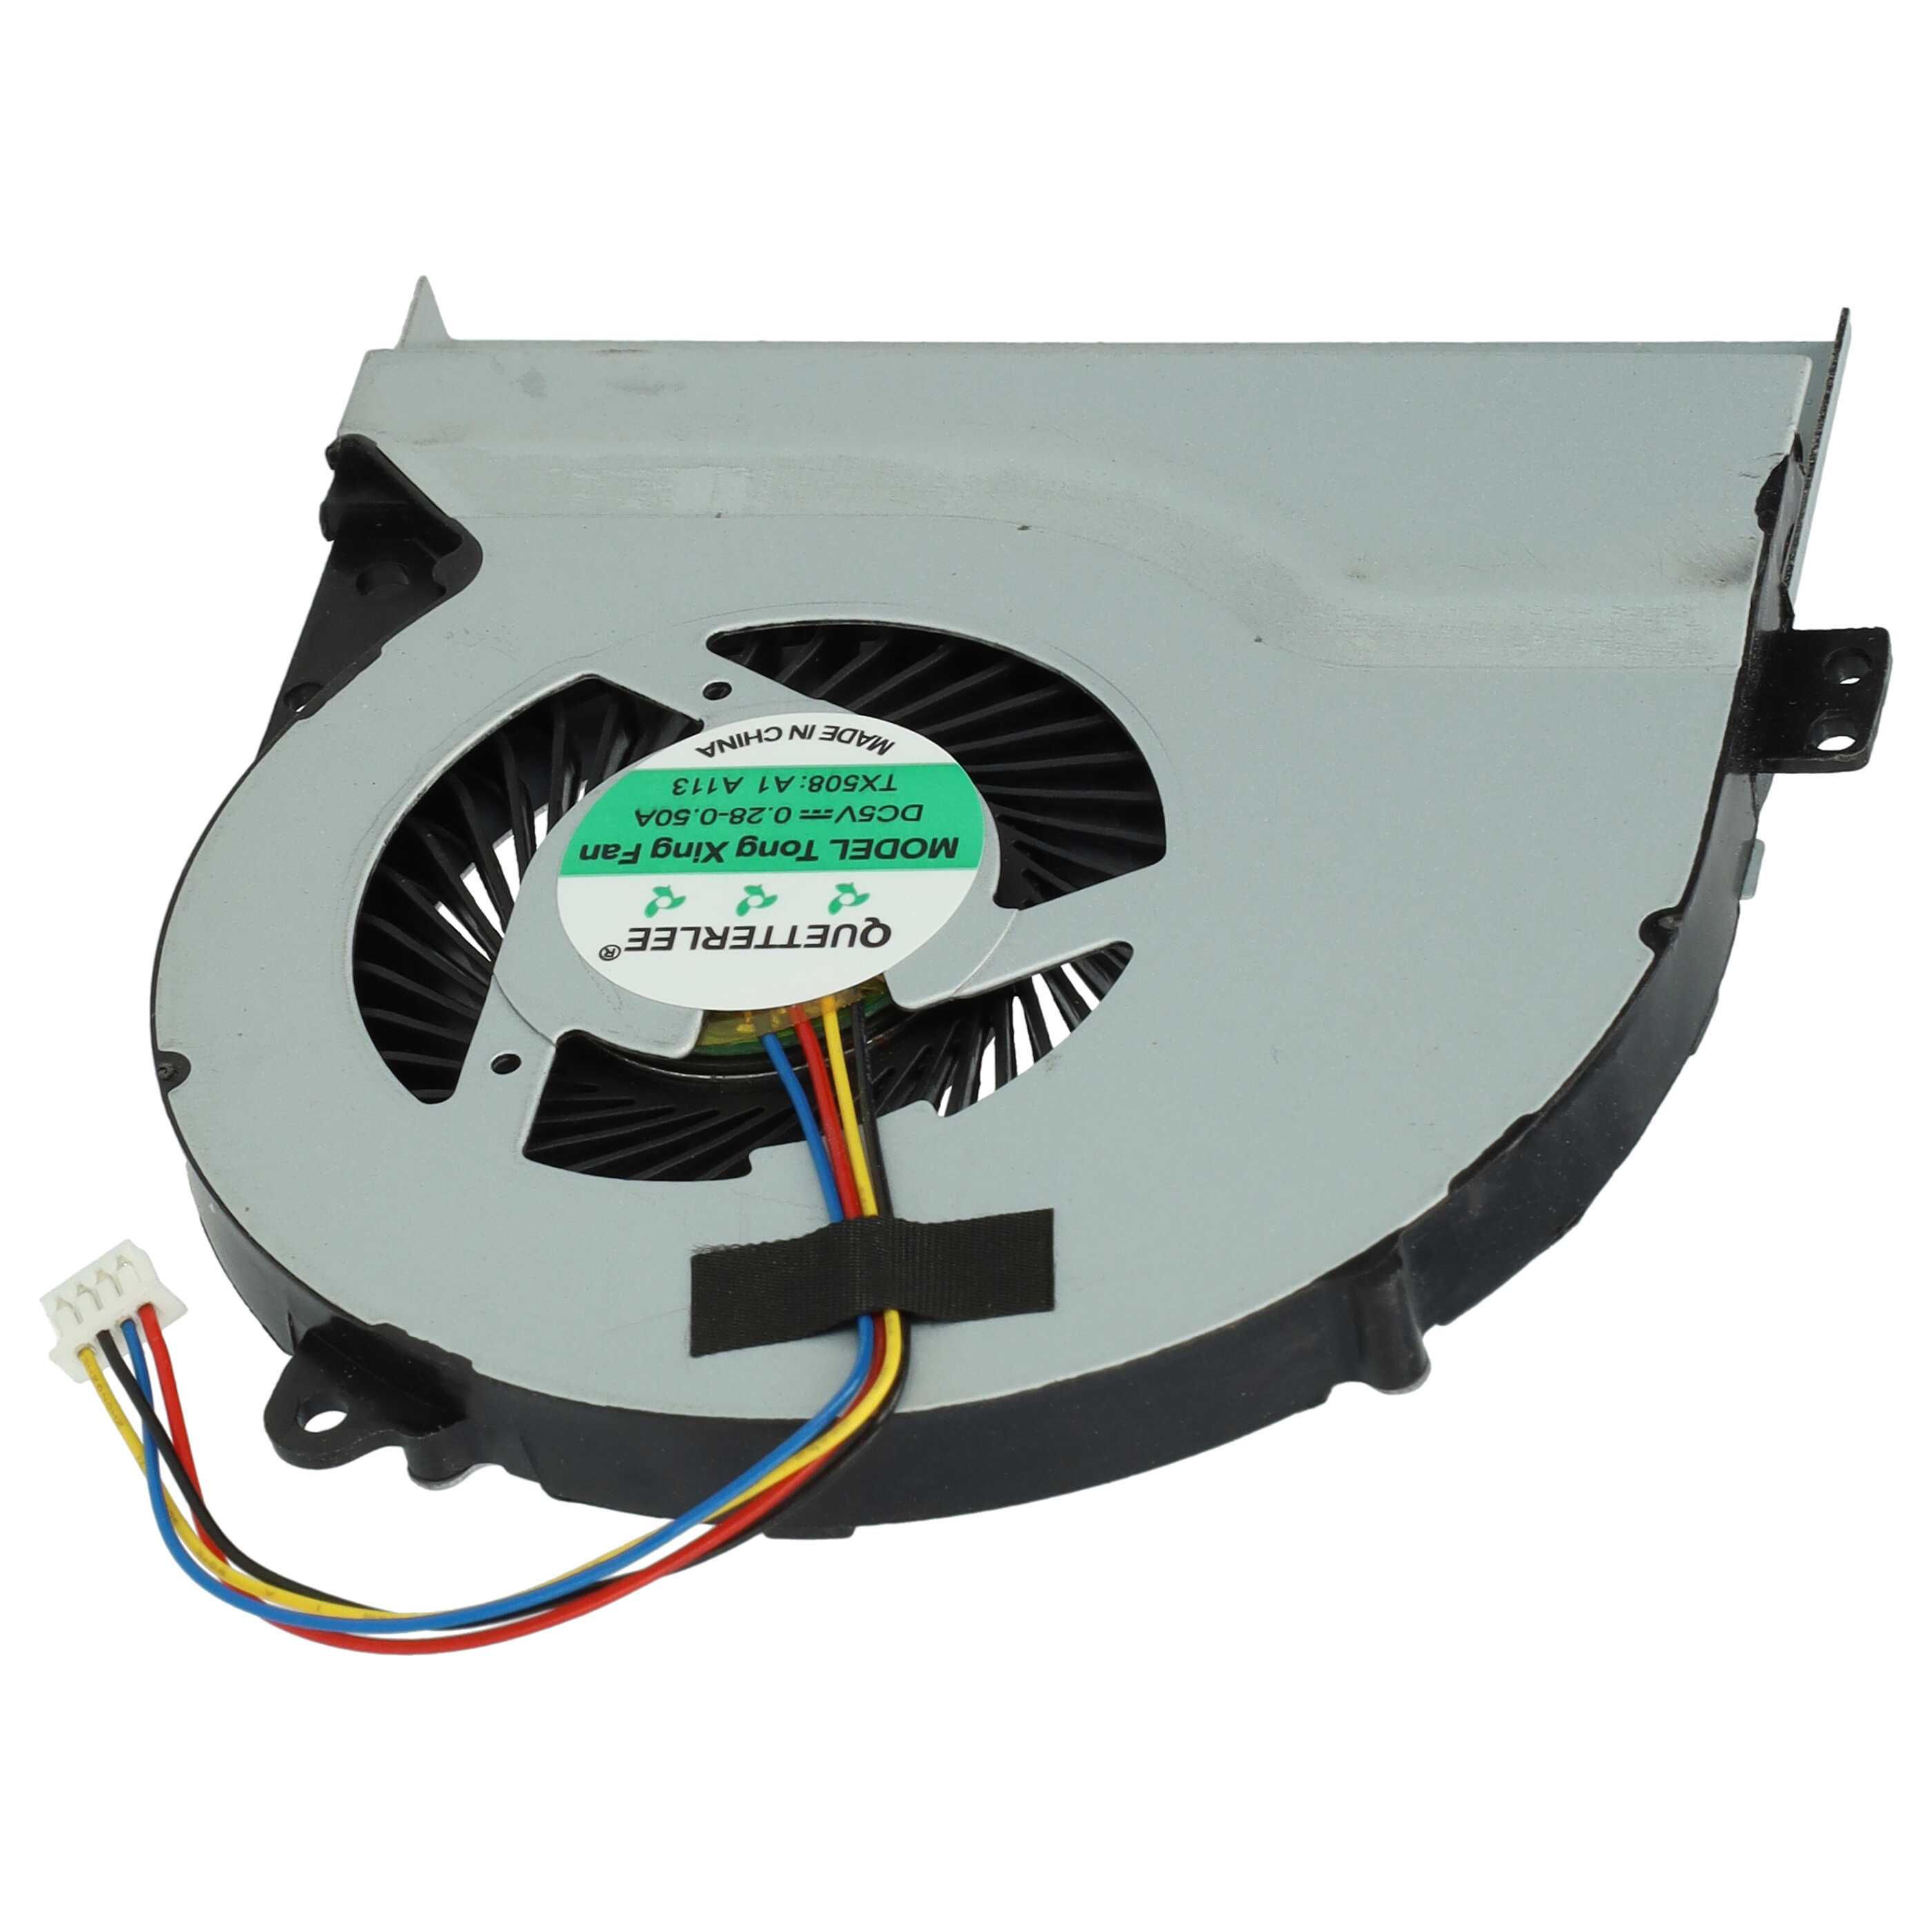 CPU / GPU Fan suitable for Asus X550C Notebook 87 x 90 x 9 mm